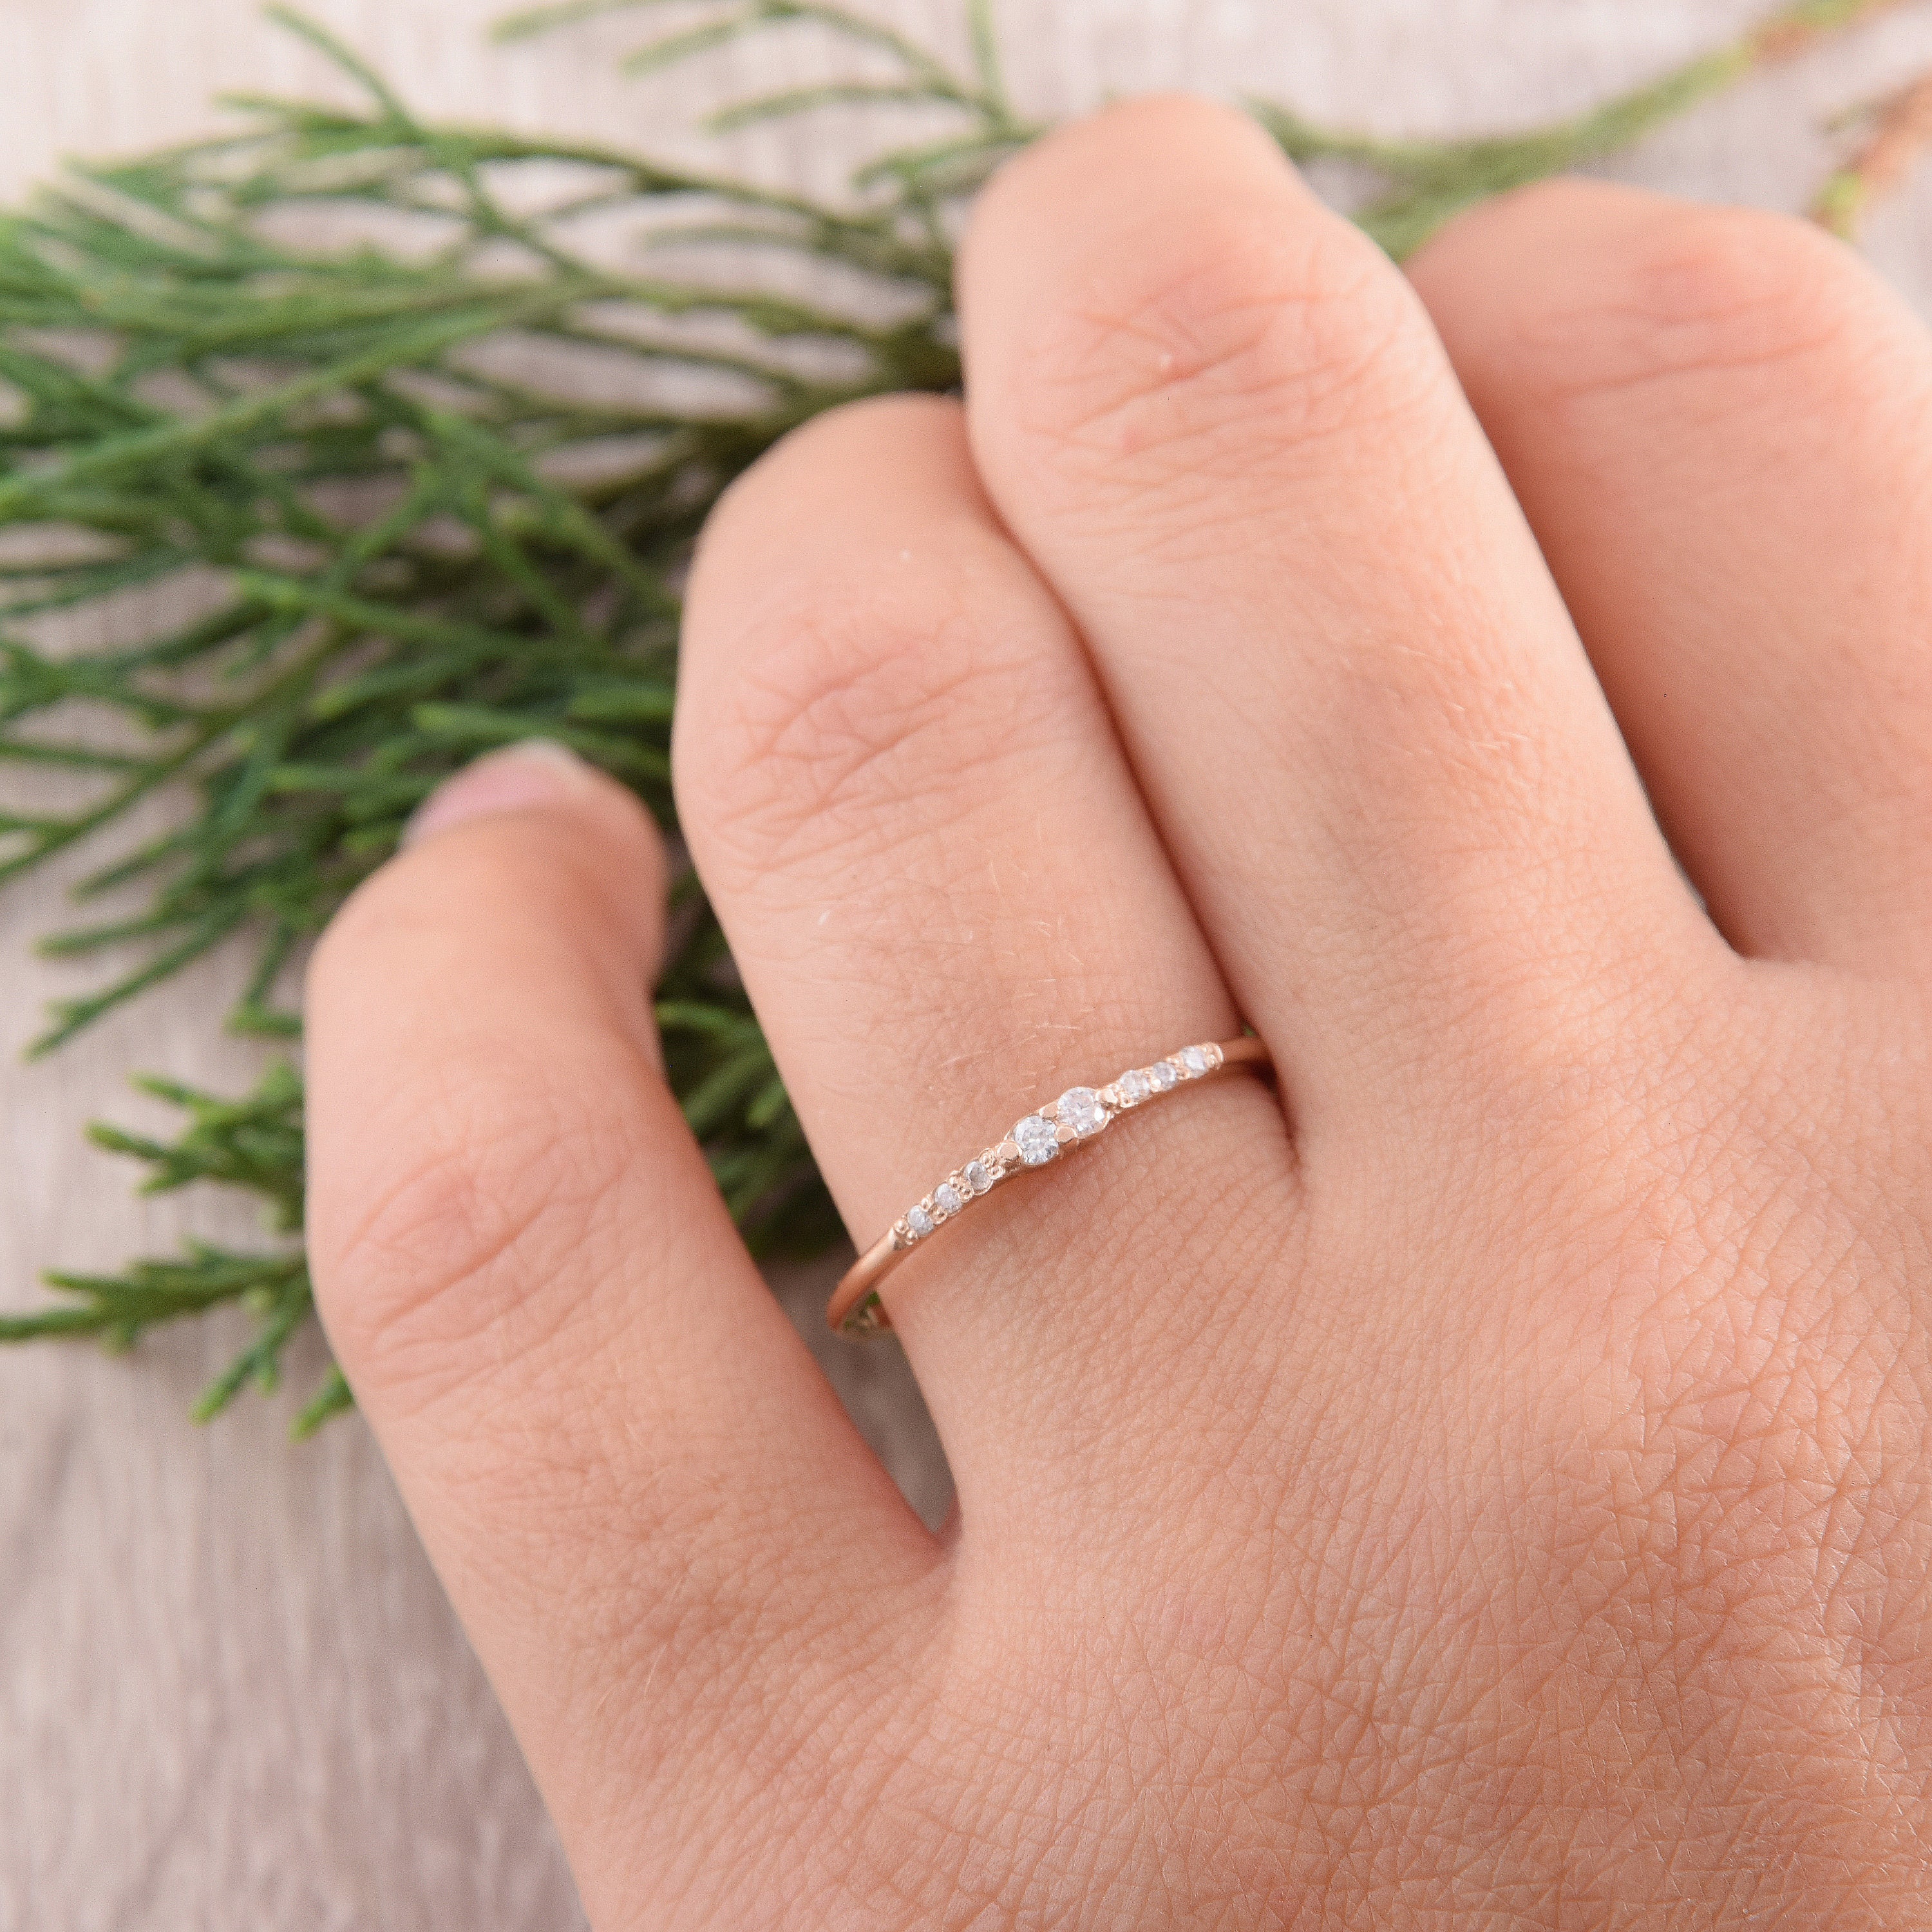 Womens Minimalist Promise Ring for Her, Dainty Gold Ring for Women